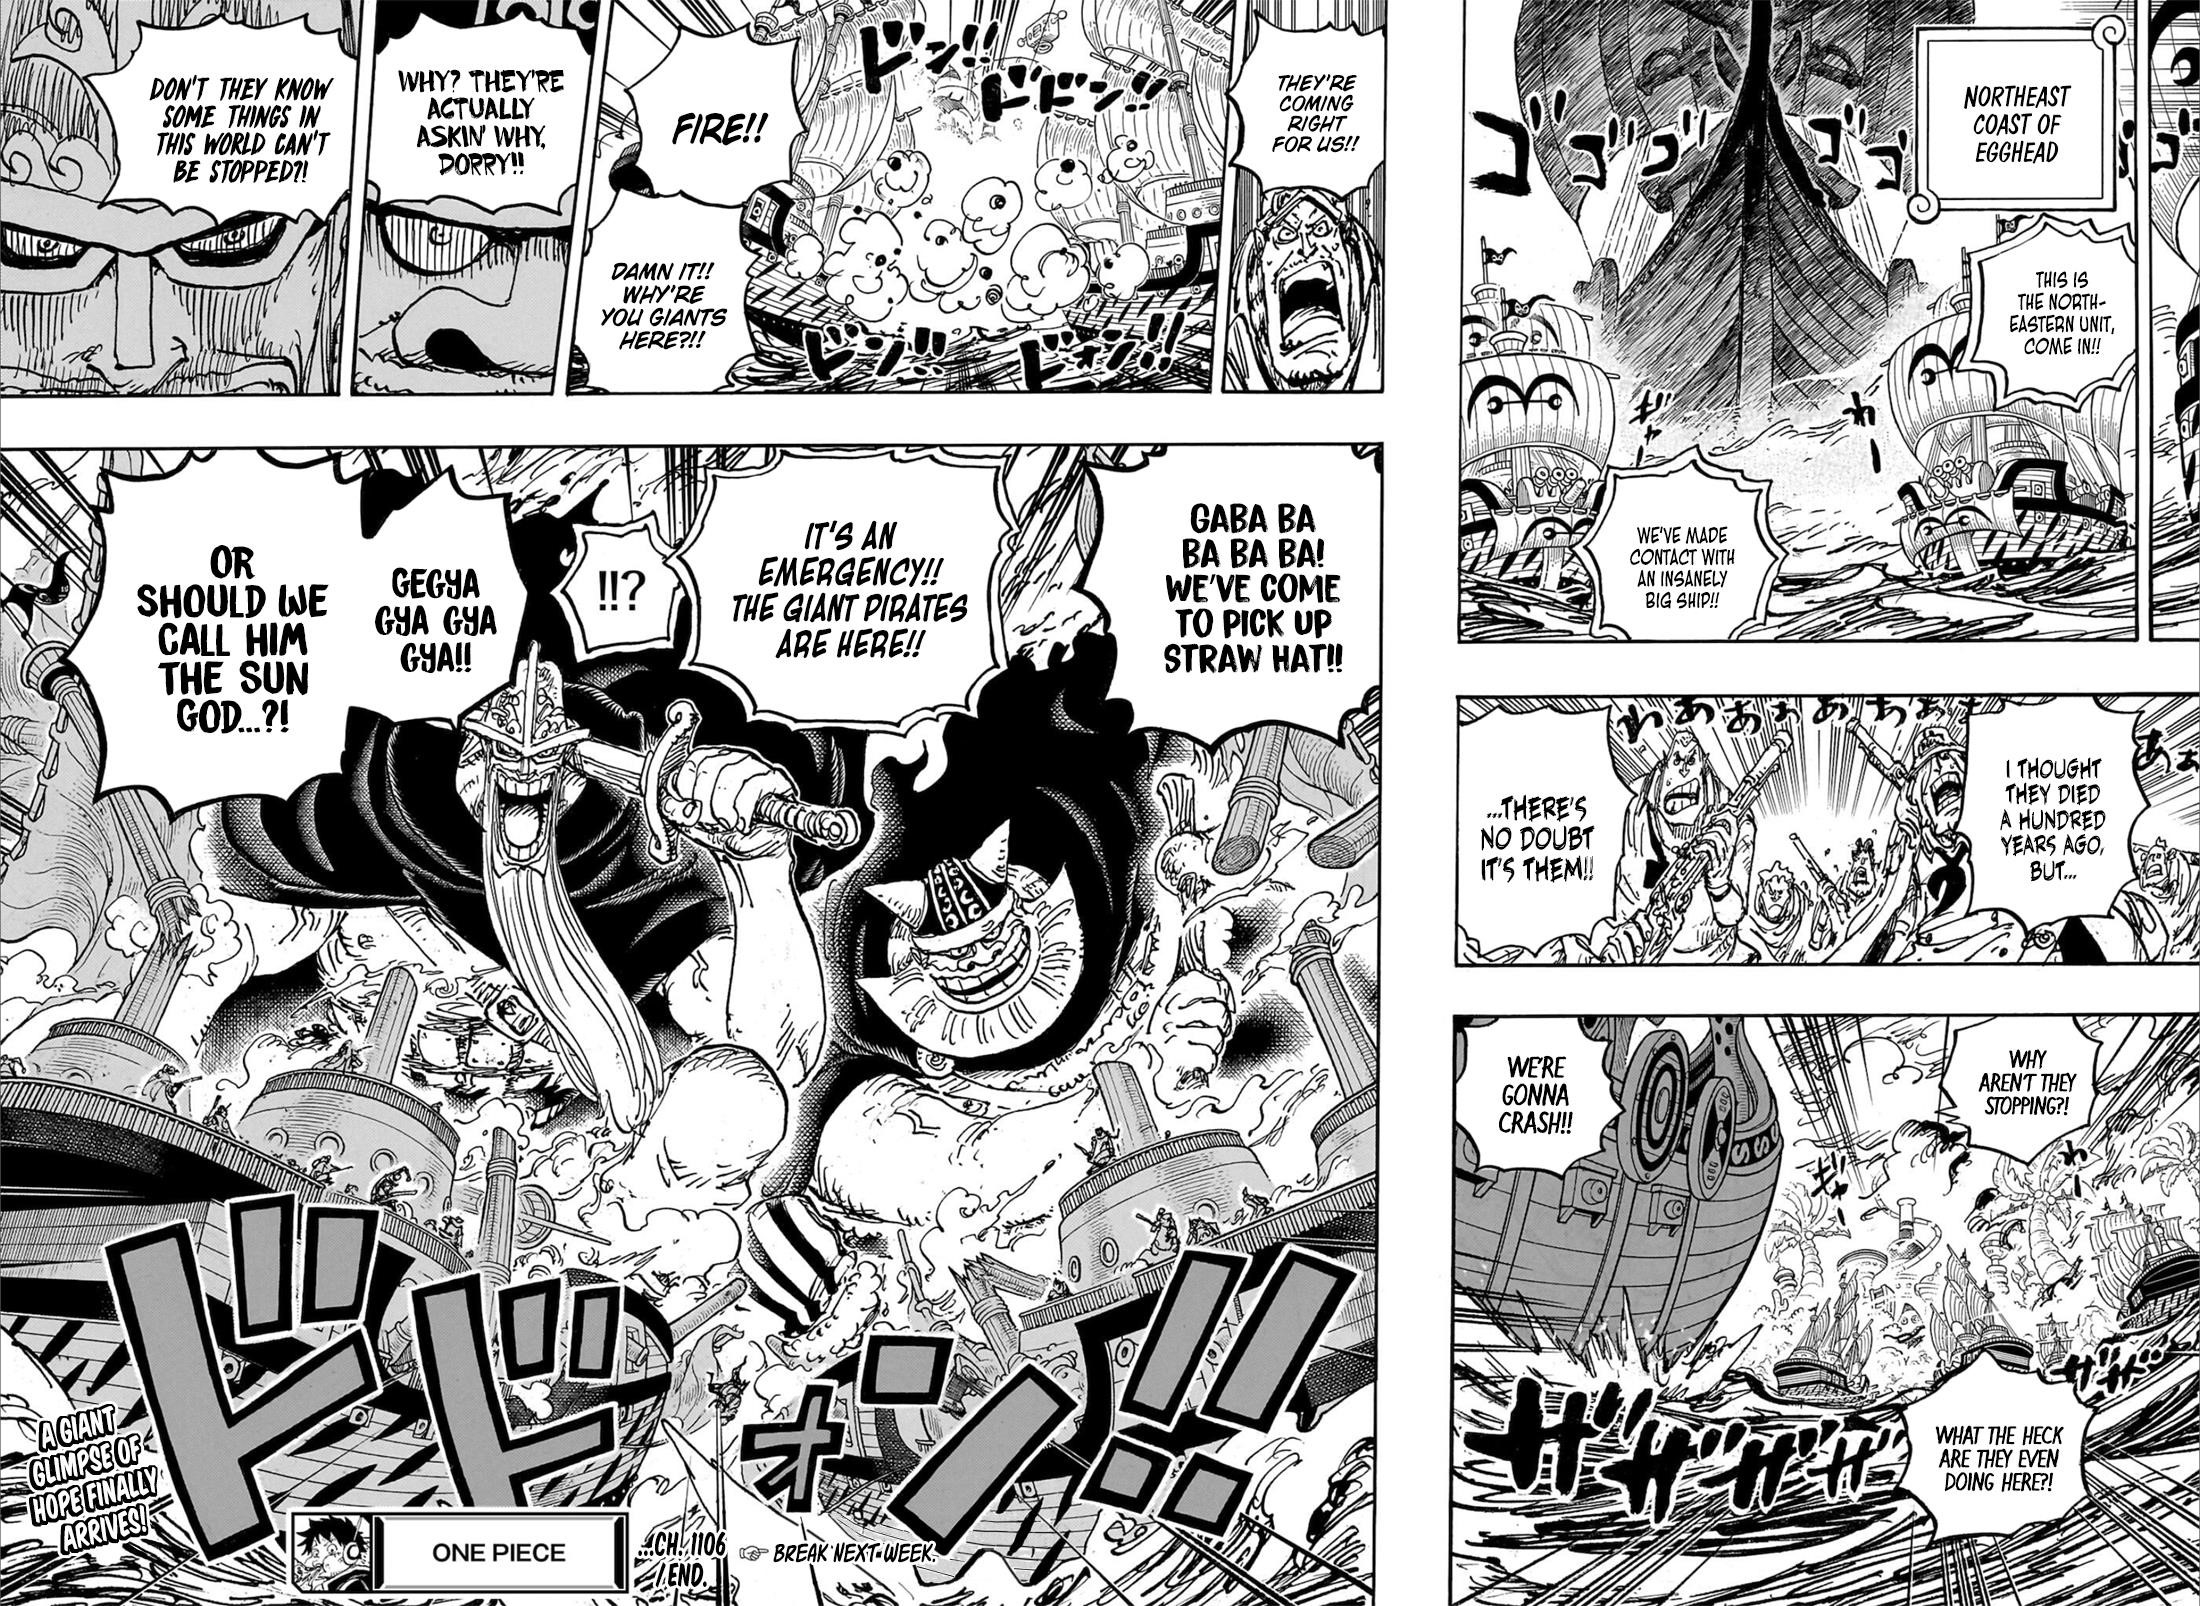 One Piece Chapter 1106 - One Piece Manga Online